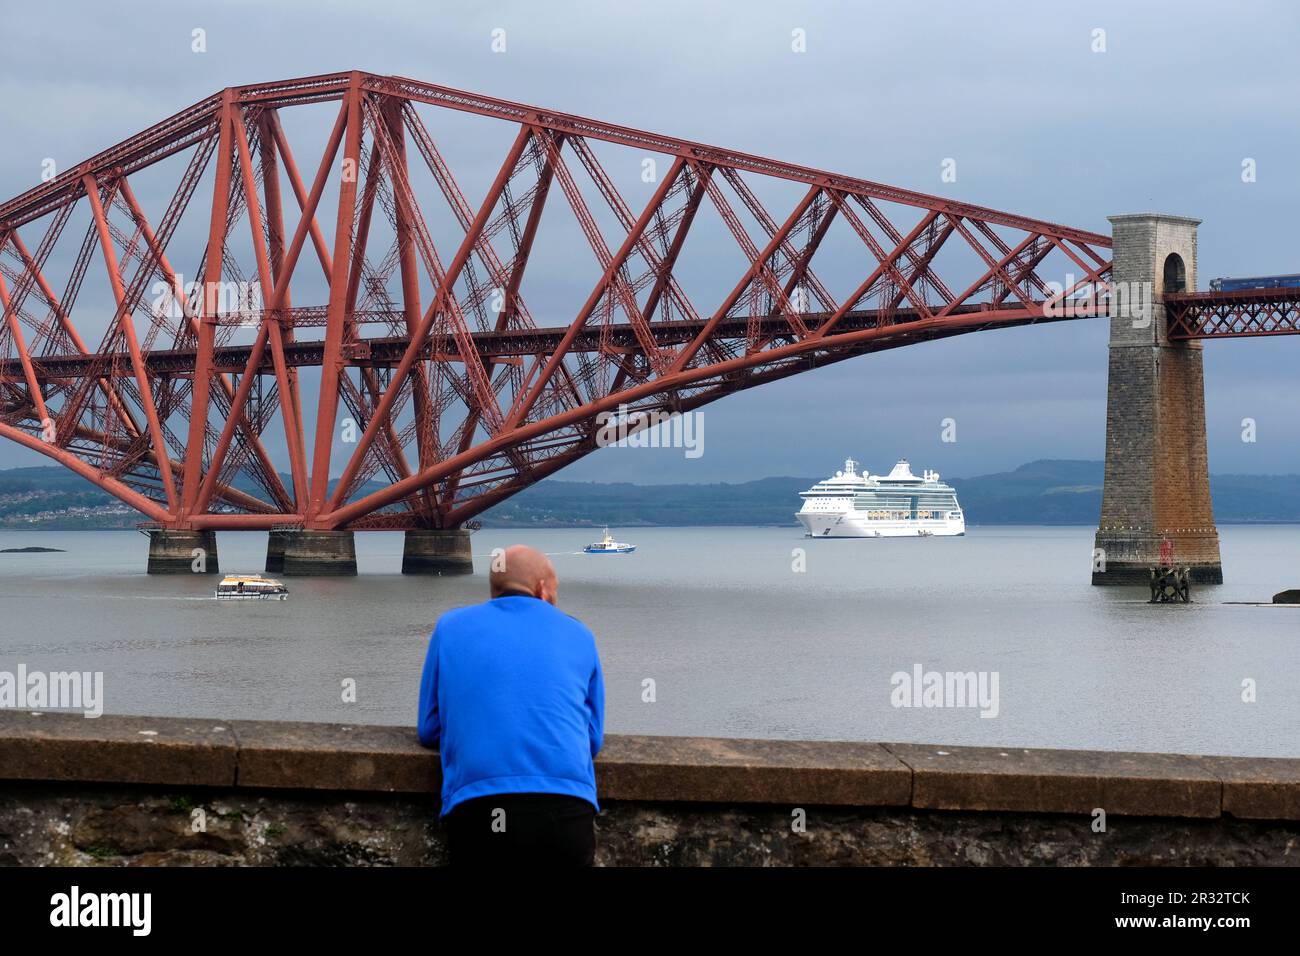 South Queensferry, Scotland, UK. 22nd May 2023. Jewel of the Seas, a 90,000 tonne, 965 feet, mega cruise liner with 12 passenger decks and equiped with its own waterpark, theatre, casino, elevators and rock climbing wall, arrived in the Forth estuary this morning for a rare stopover. Berthed beside the Forth bridge allowing the sense of scale to be appreciated. Credit: Craig Brown/Alamy Live News Stock Photo